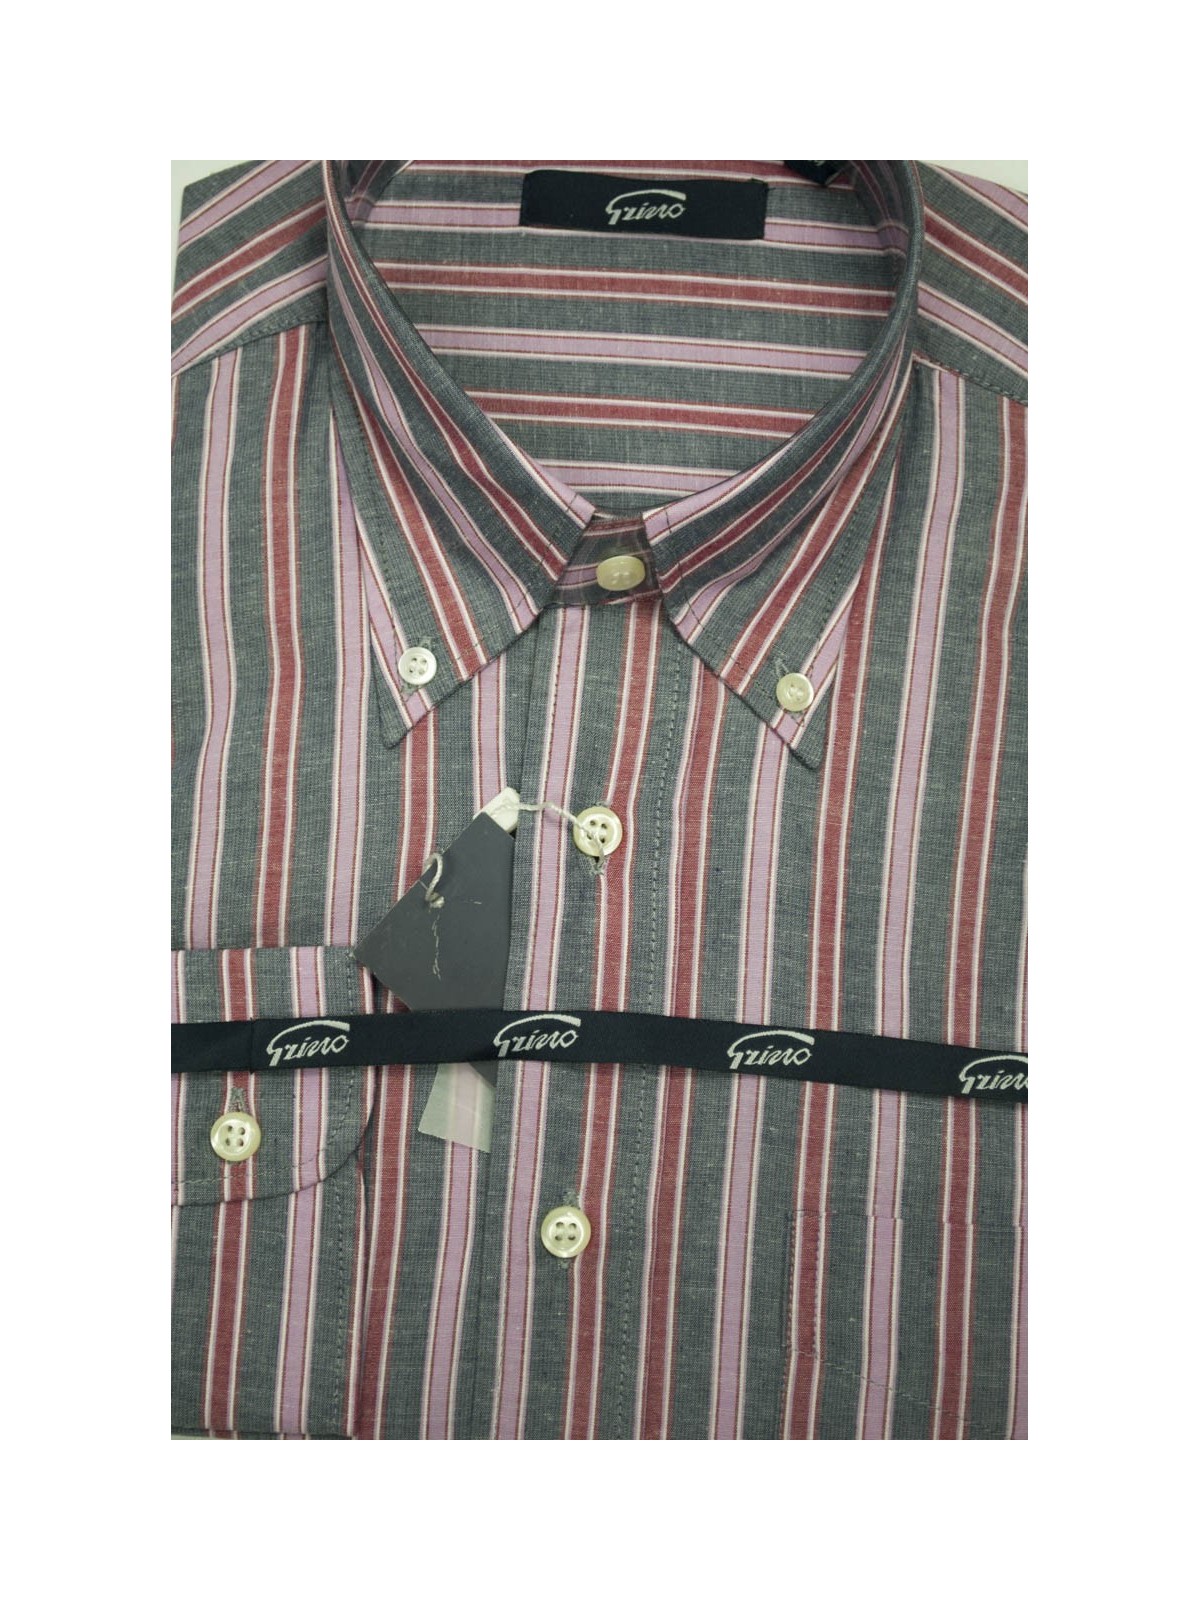 Man shirt M 40-41 ButtonDown Lines Pink Grey and Red FilaFil